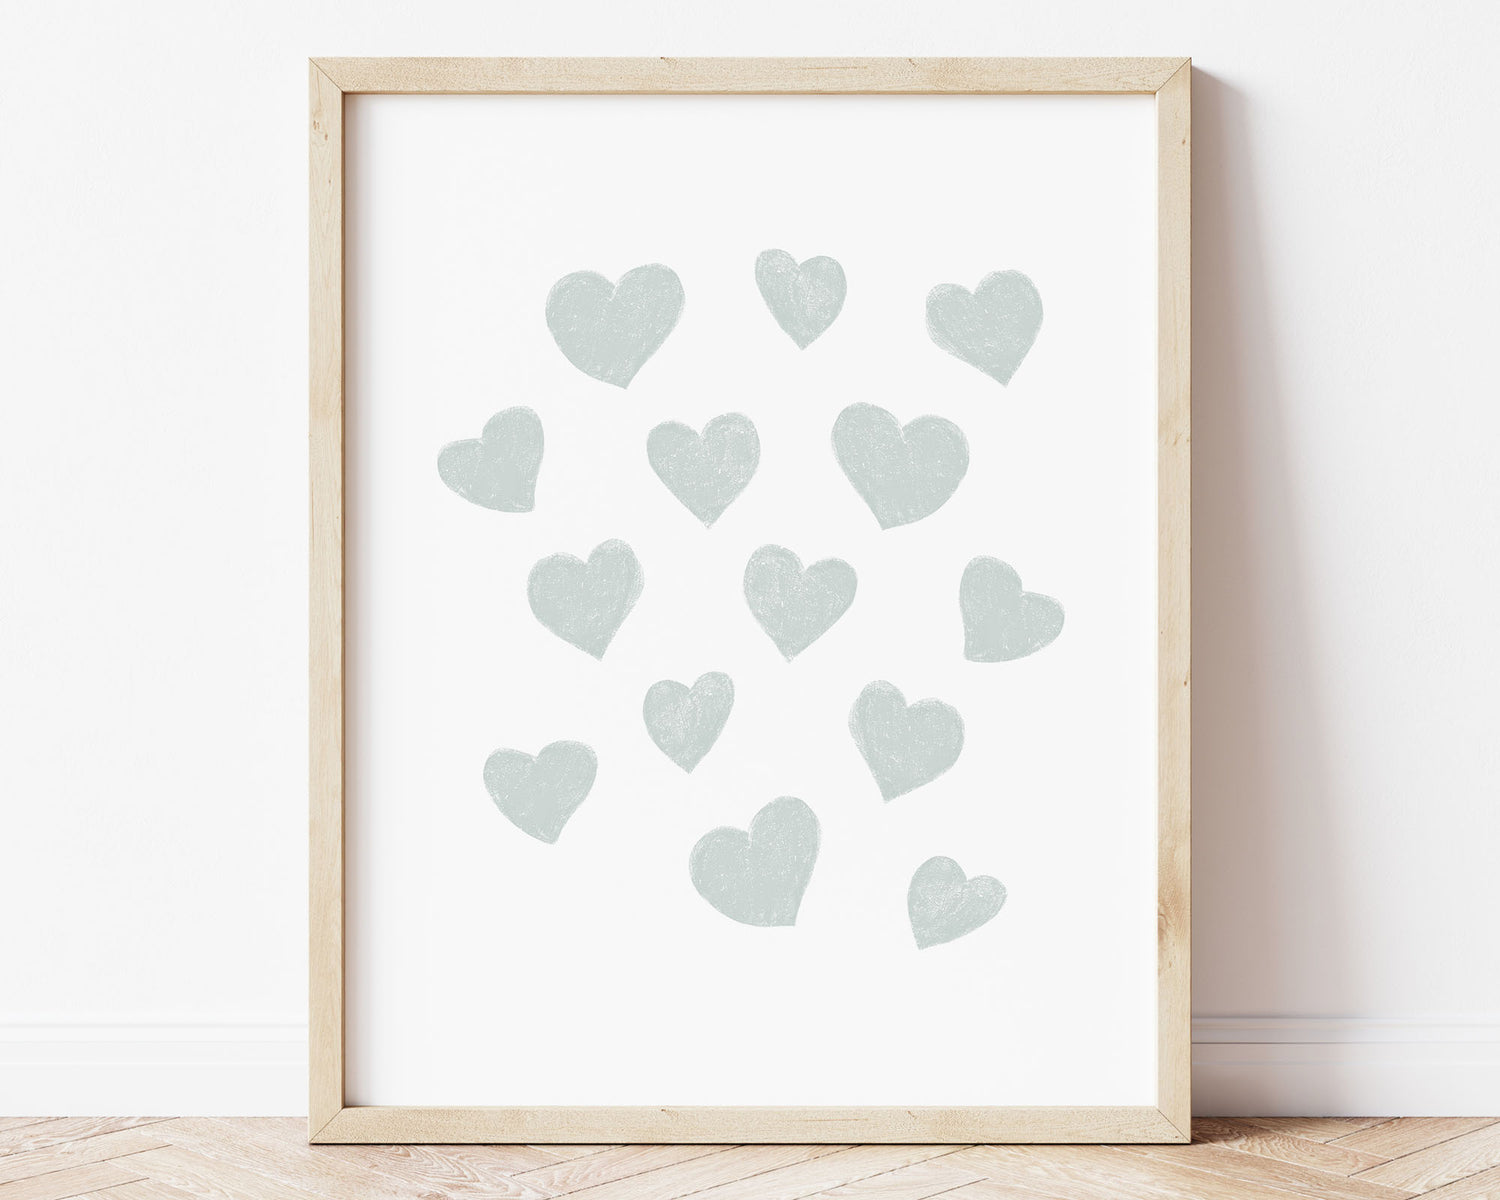 Muted pastel blue small scattered hearts in chalky brushstroke illlustration style perfect for Baby Nursery Décor, Little Boys Bedroom Wall Art, Toddler Girls Room Wall Hangings, Kiddos Bathroom Wall Art and Childrens Playroom Décor.